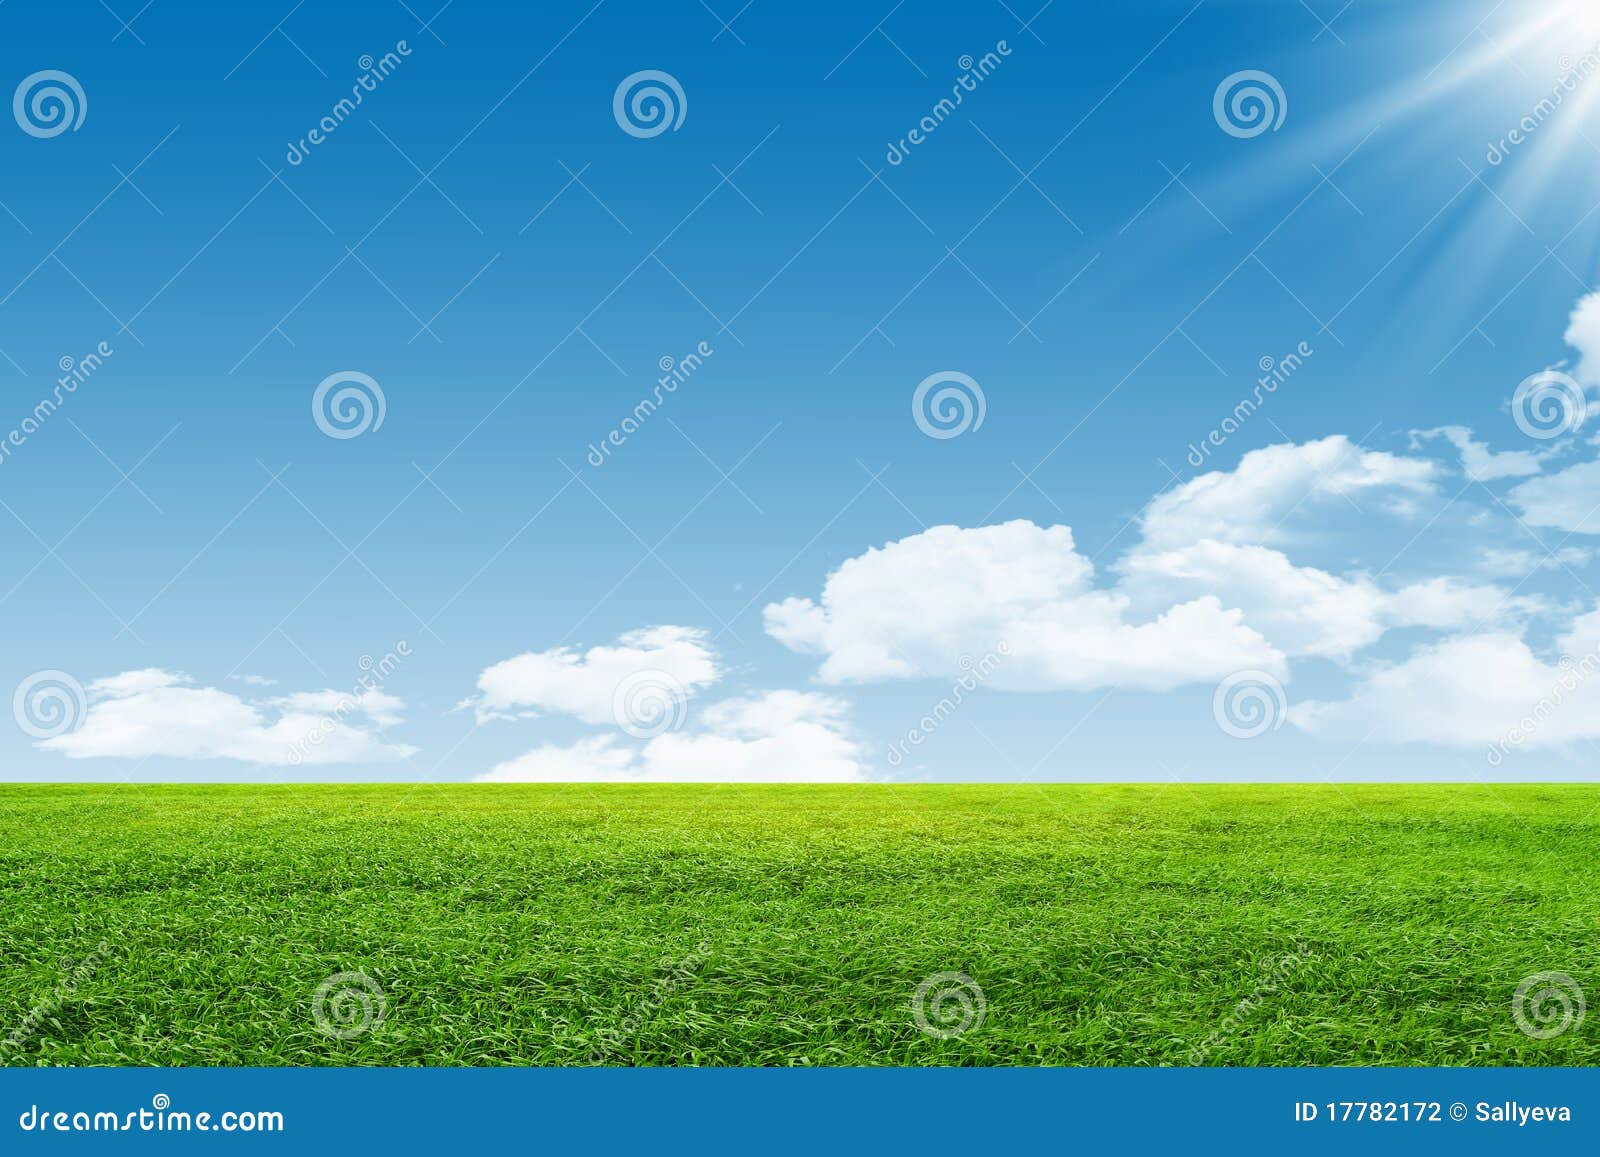 Blue sky and green field stock photo. Image of clean - 17782172